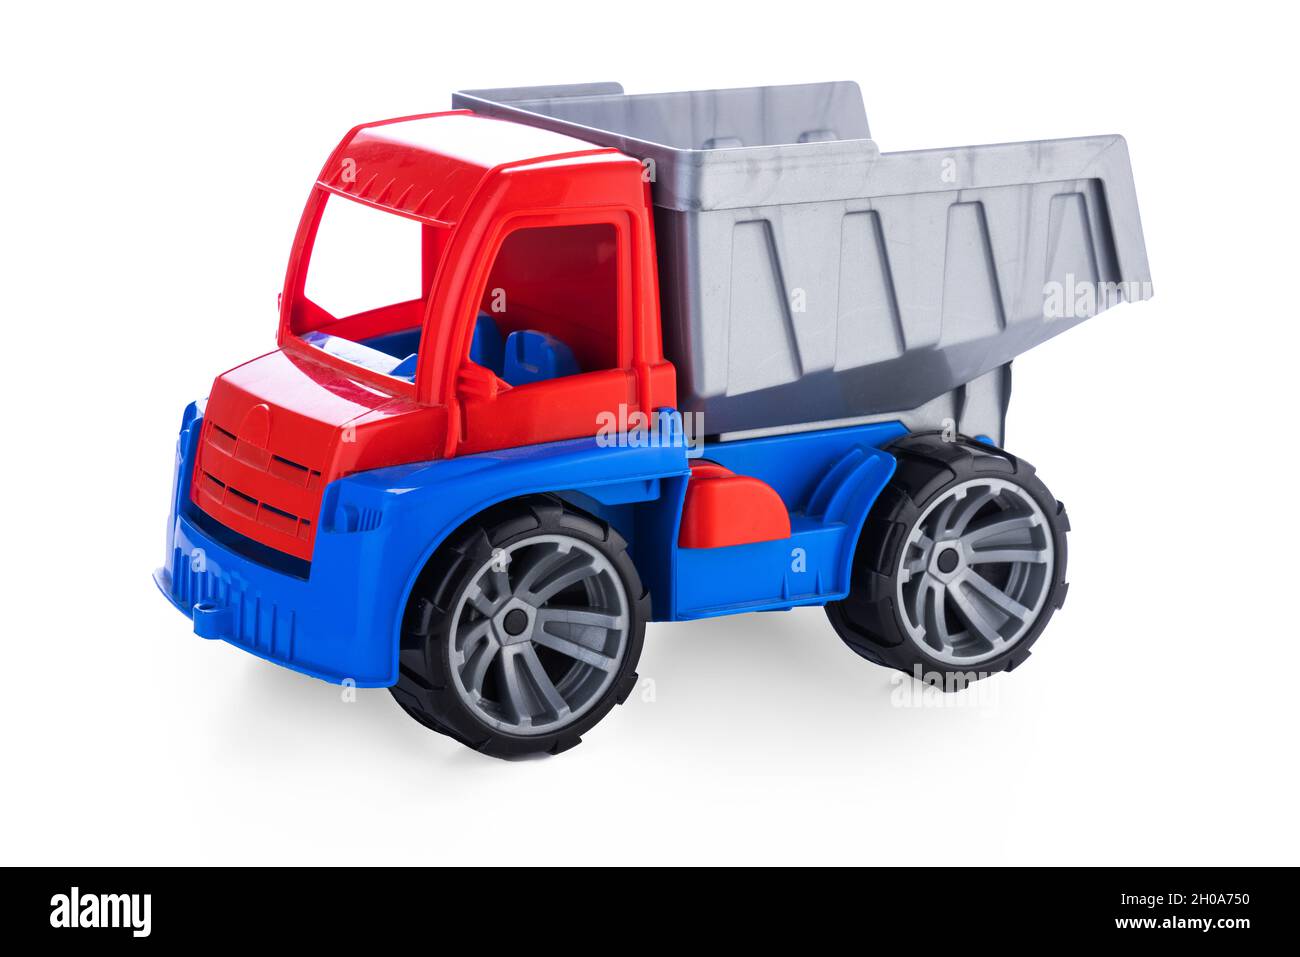 Colorful toy truck or construction lorry isolated on white background Stock Photo